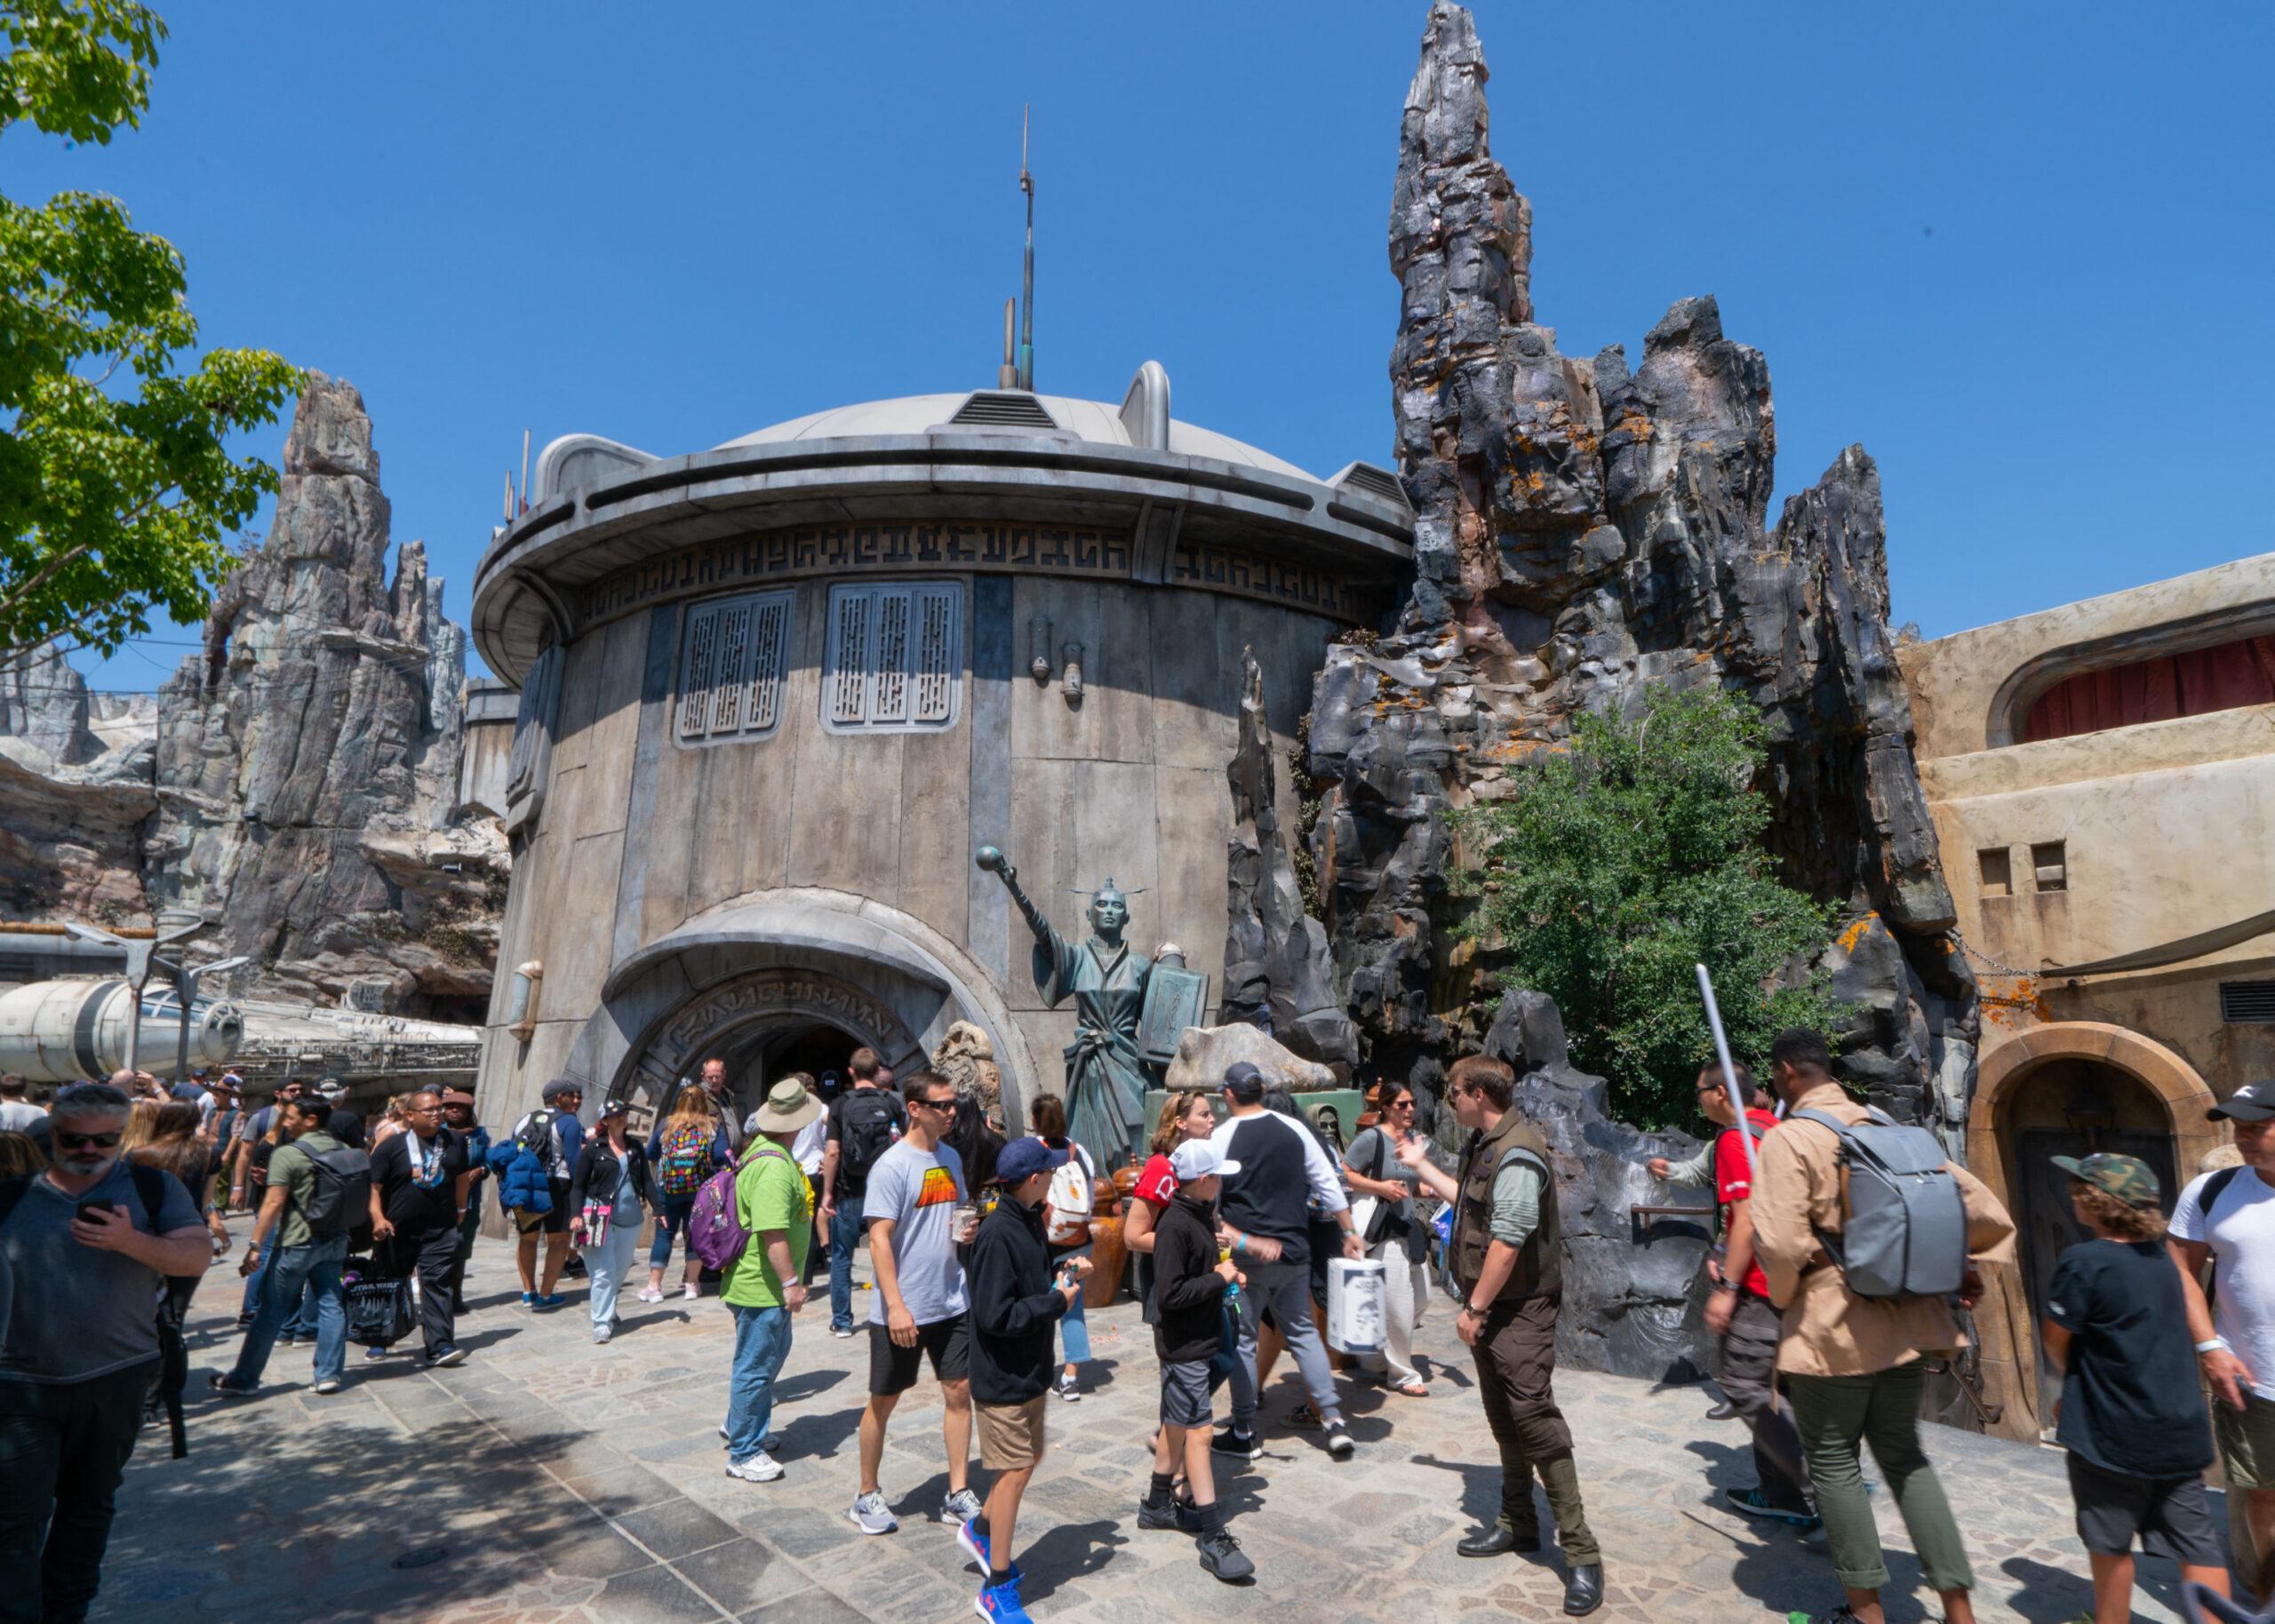 Parent Whips Child With Dog Leash At Disney World Per Incident Report